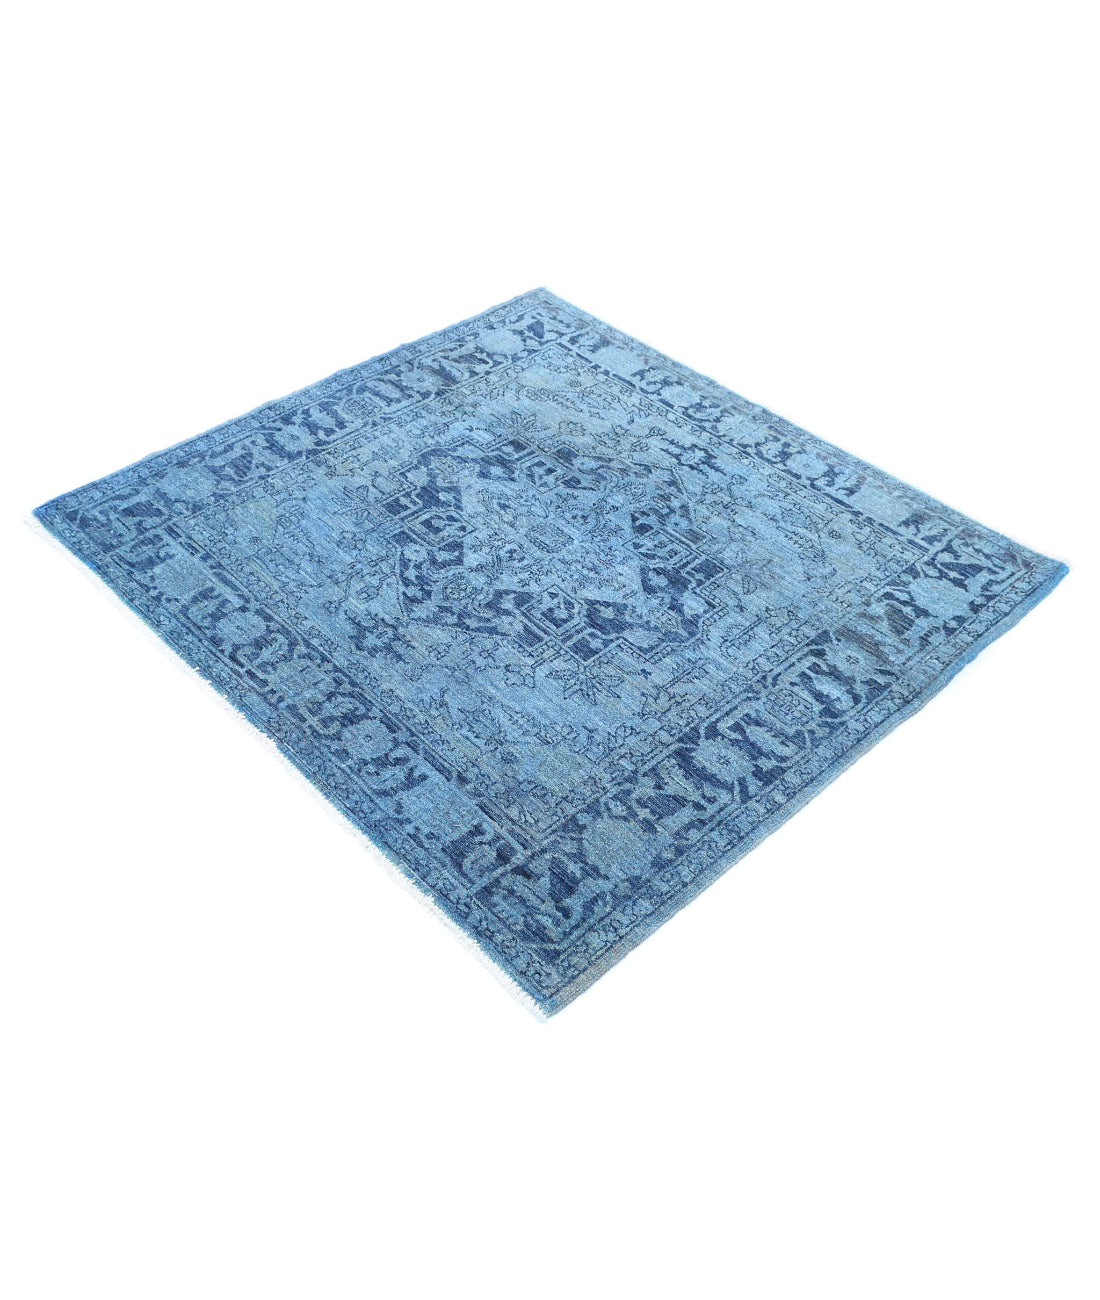 Hand Knotted Overdye Wool Rug - 4'1'' x 4'4'' 4'1'' x 4'4'' (123 X 130) / Blue / Blue